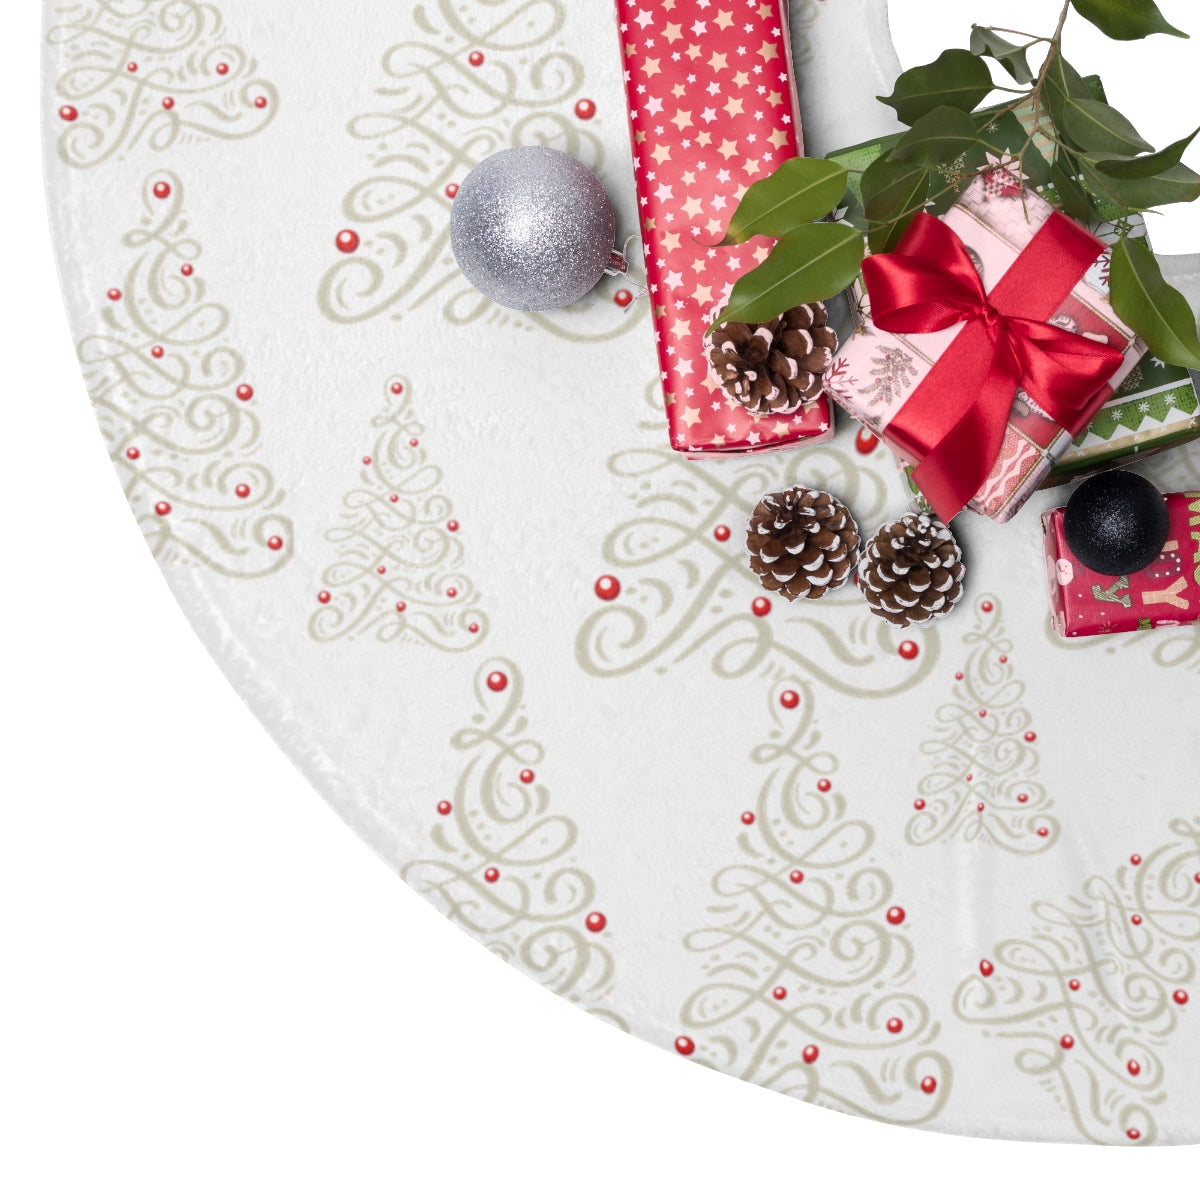 White Christmas Tree skirt with silver trees and red christmas bulbs